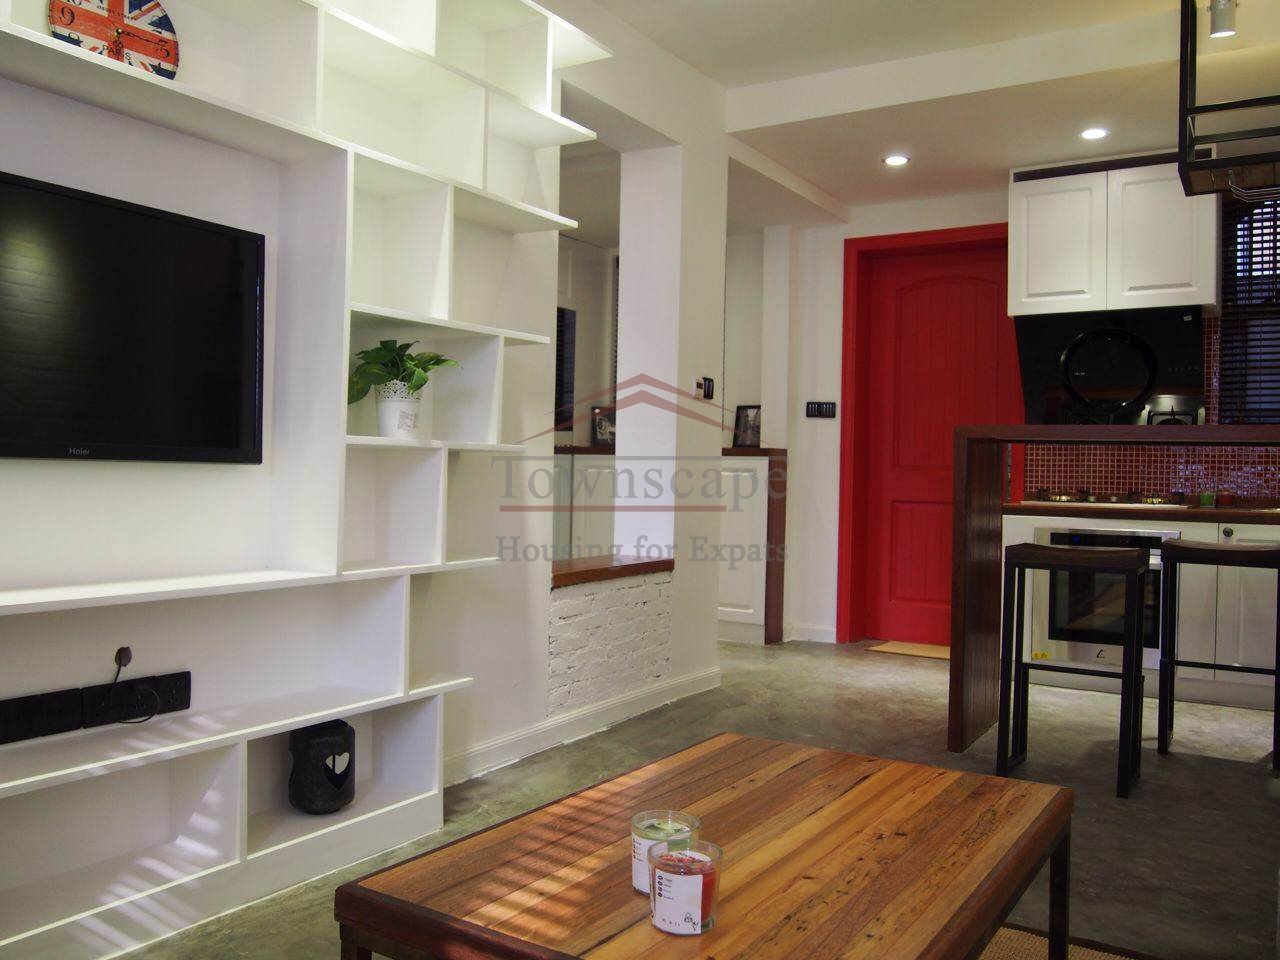 Shanghai apartment French Concession Fantastic 1 BR Lane house for rent in Jing An area